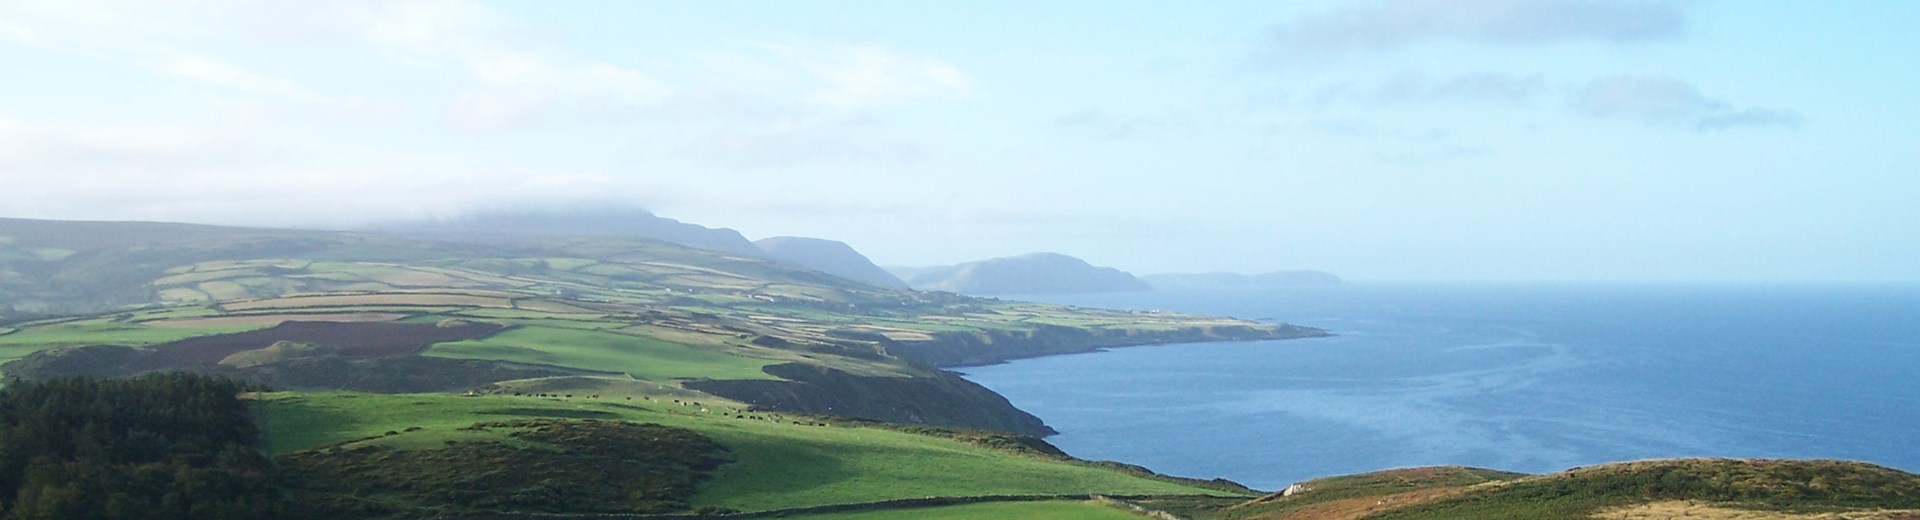 The Isle Of Man taken from above. Green rolling hills and a coastline with blue skies. 